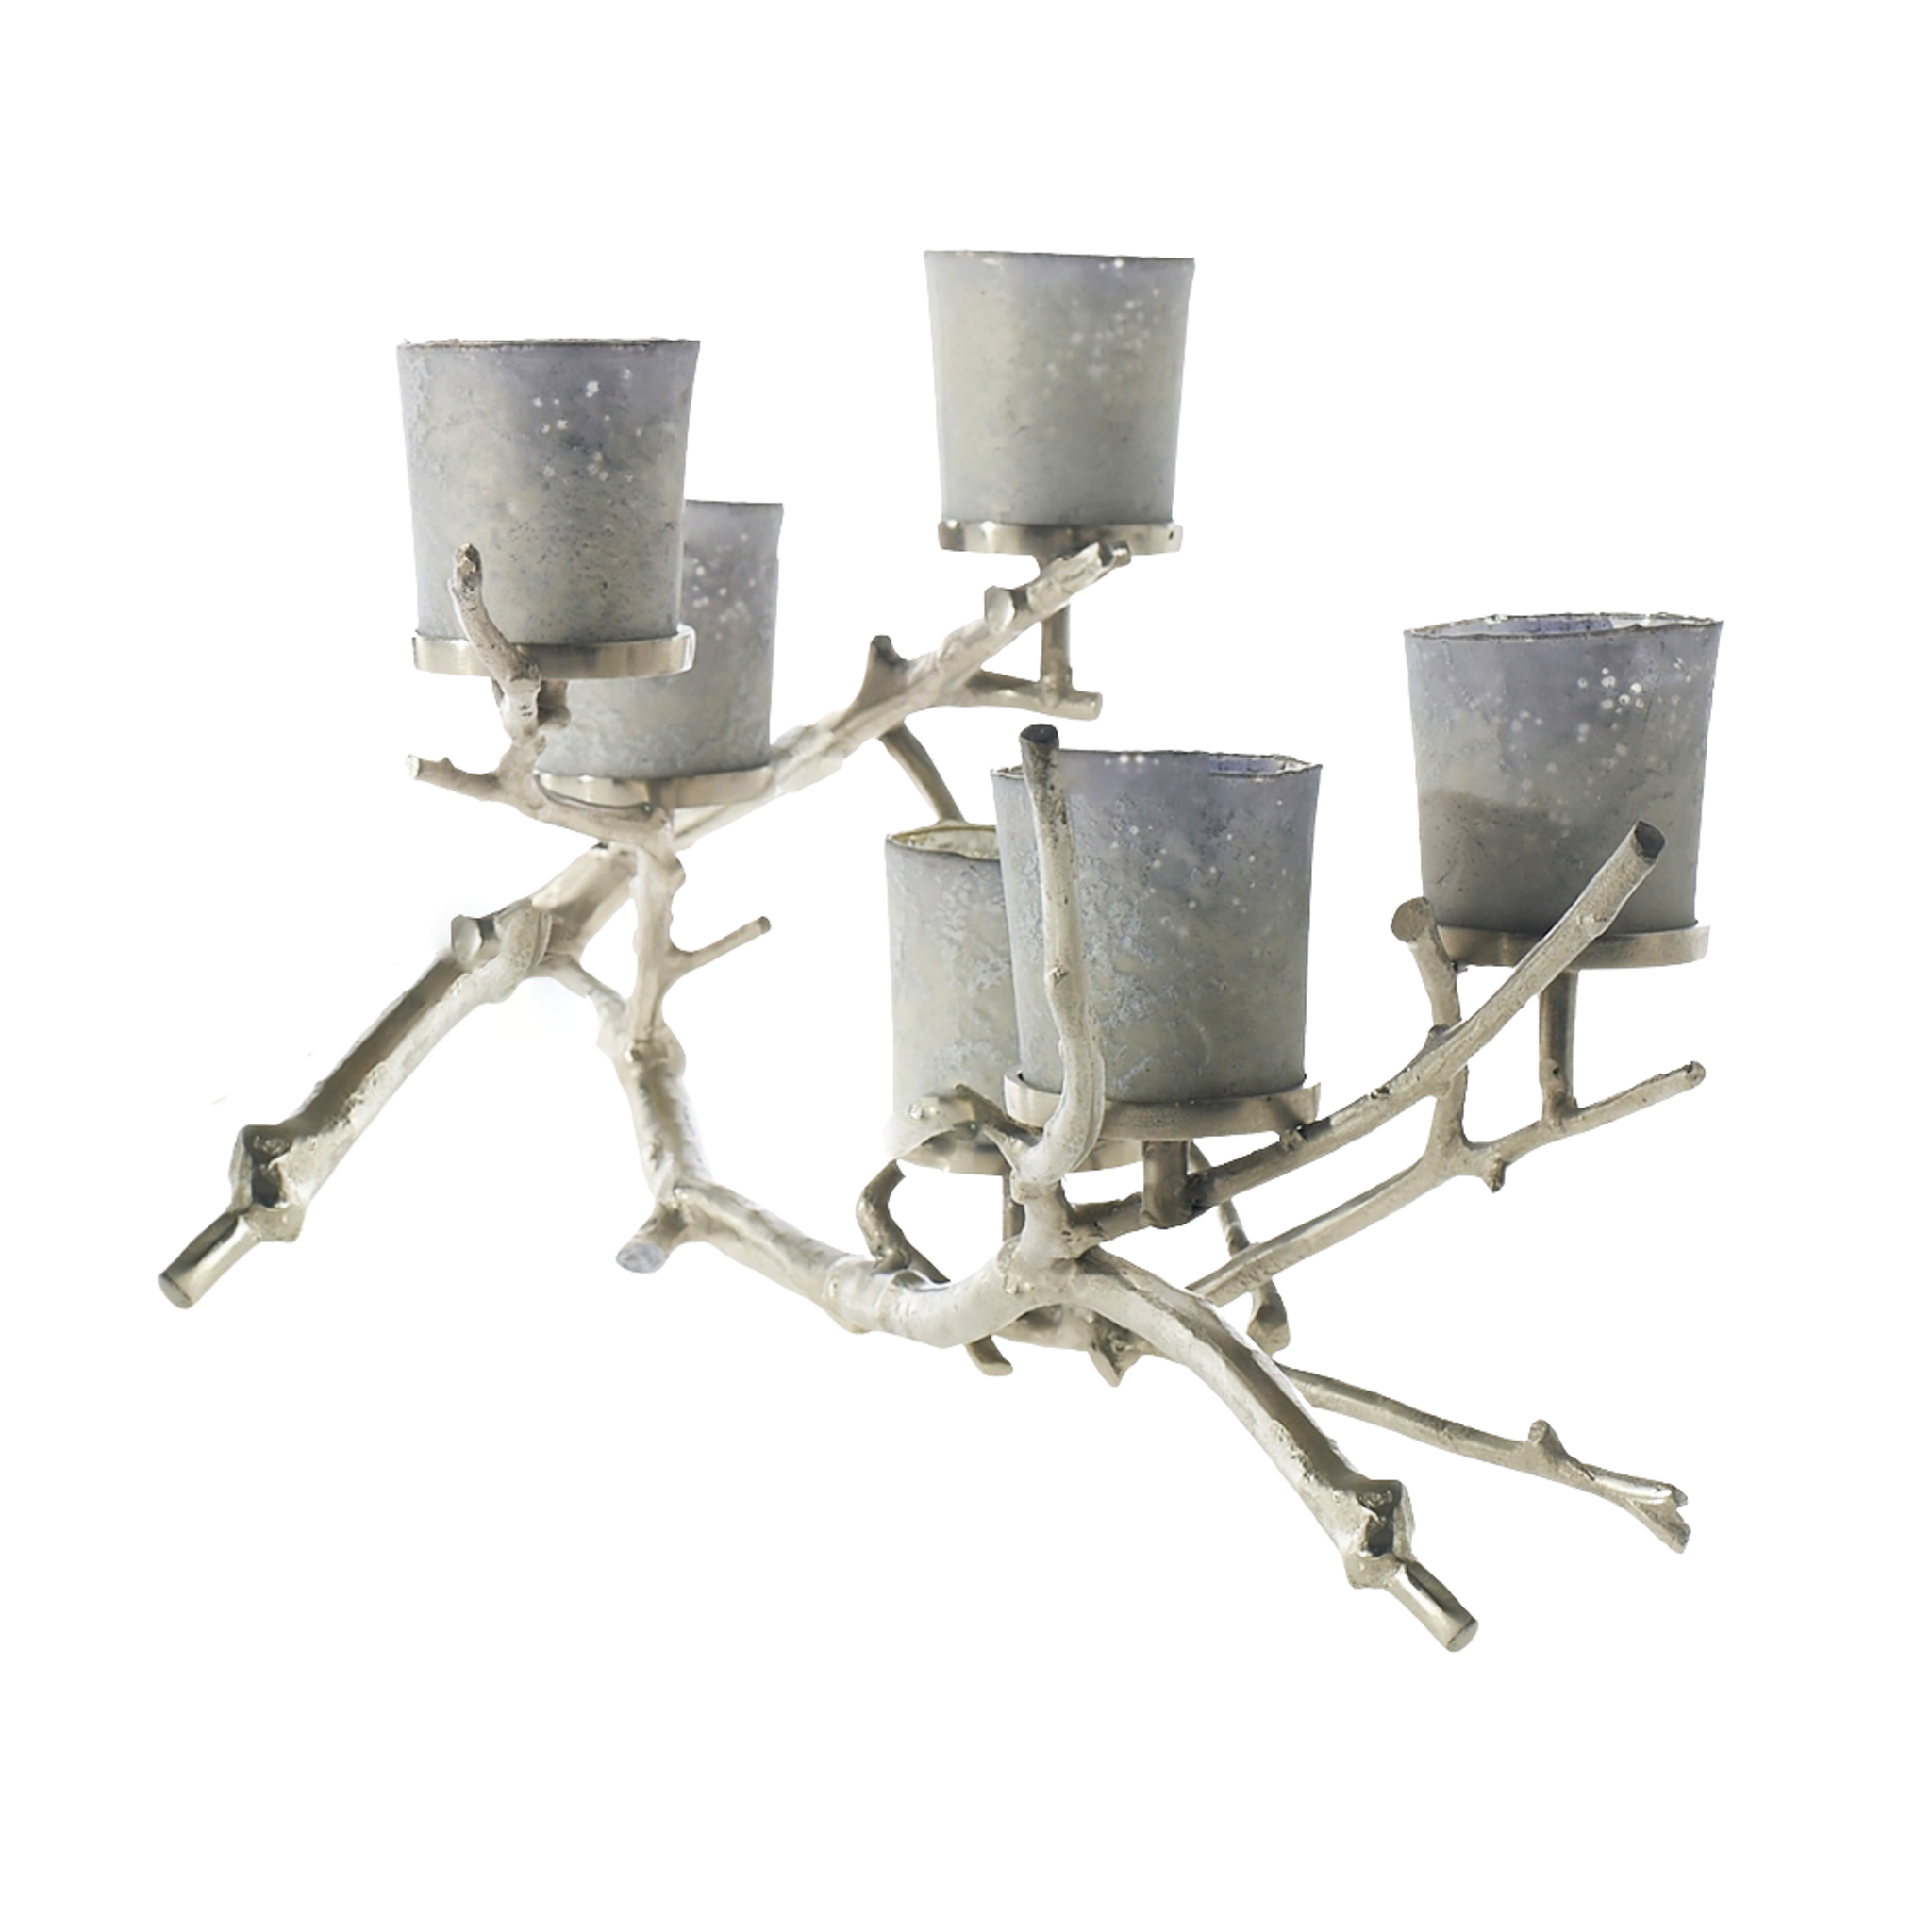 Modern Silver Metal Twig with Silver Glass Votives